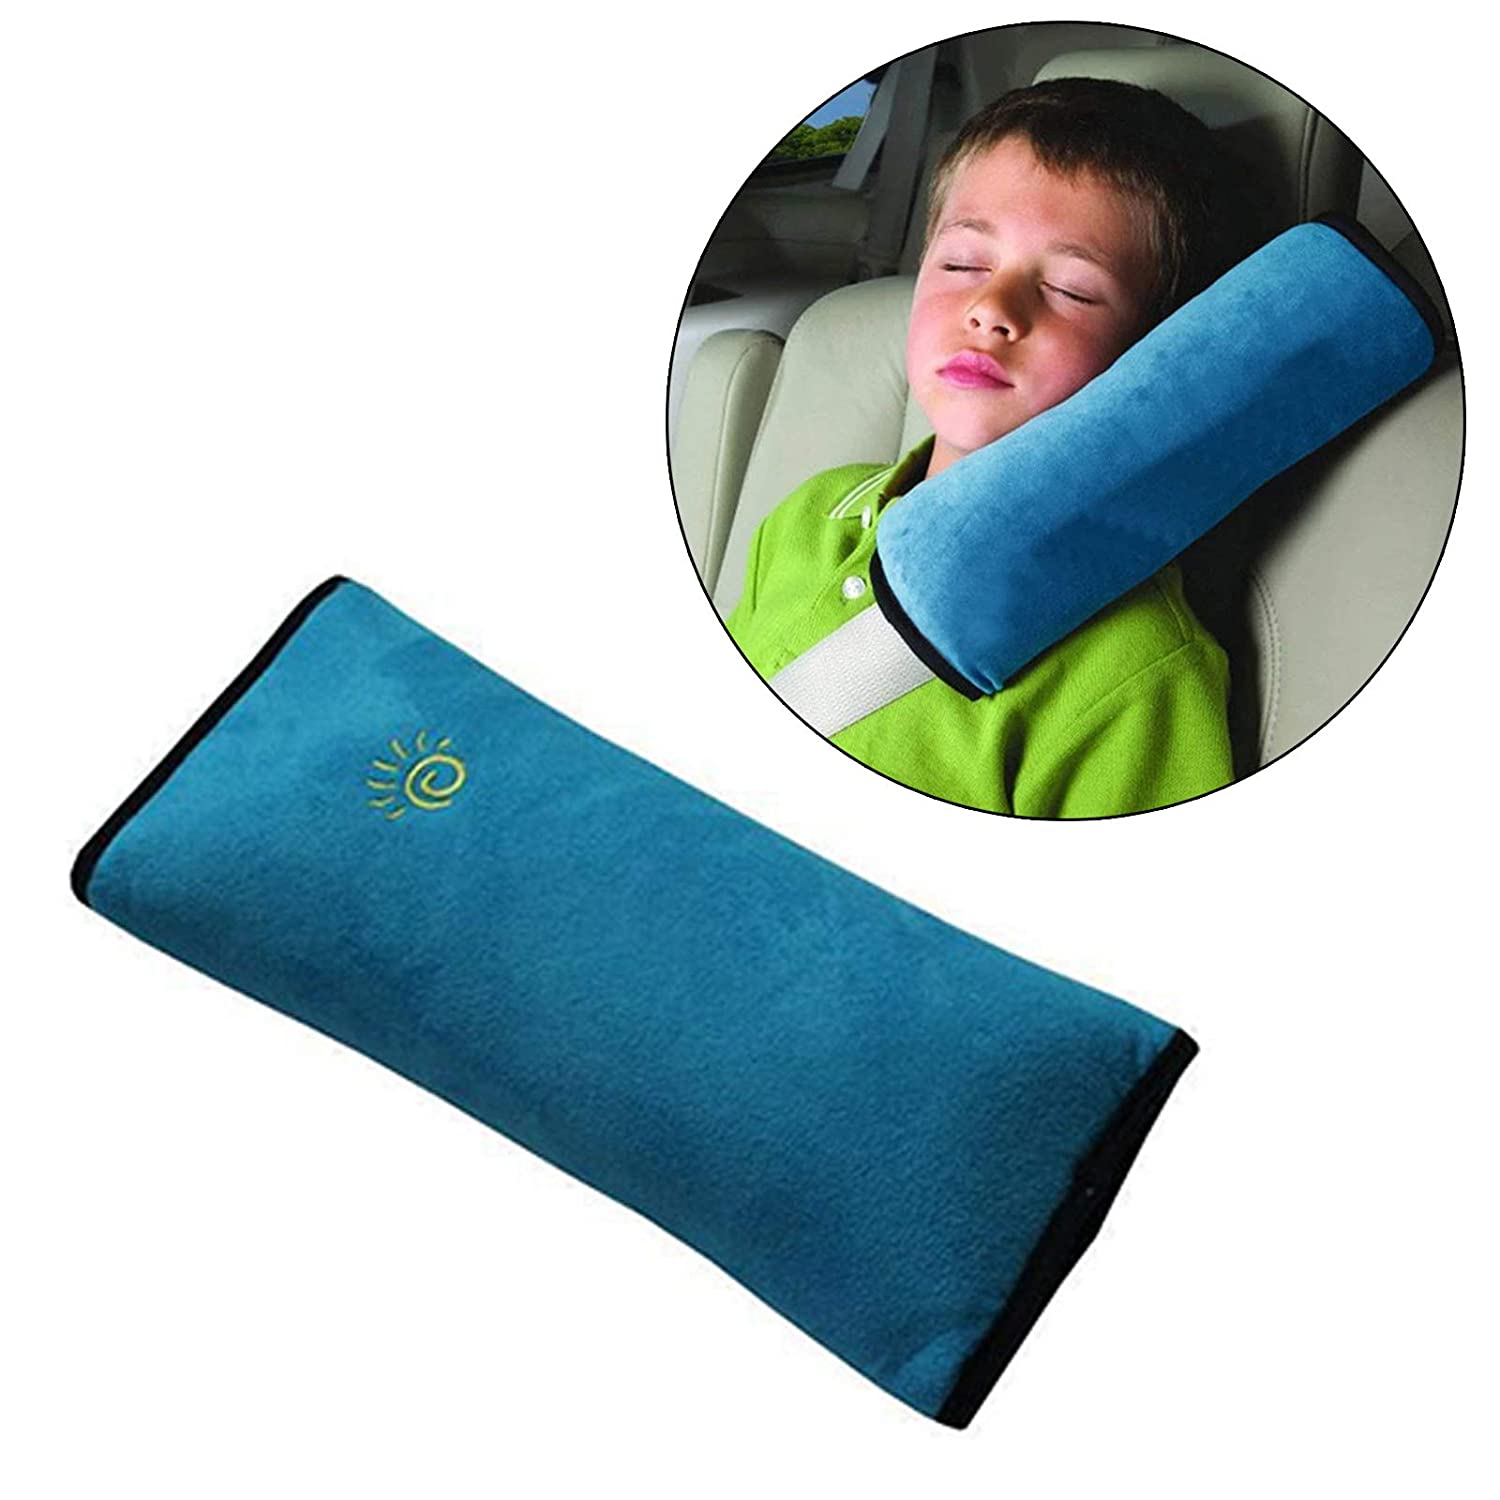 Travel Pillow for neck support